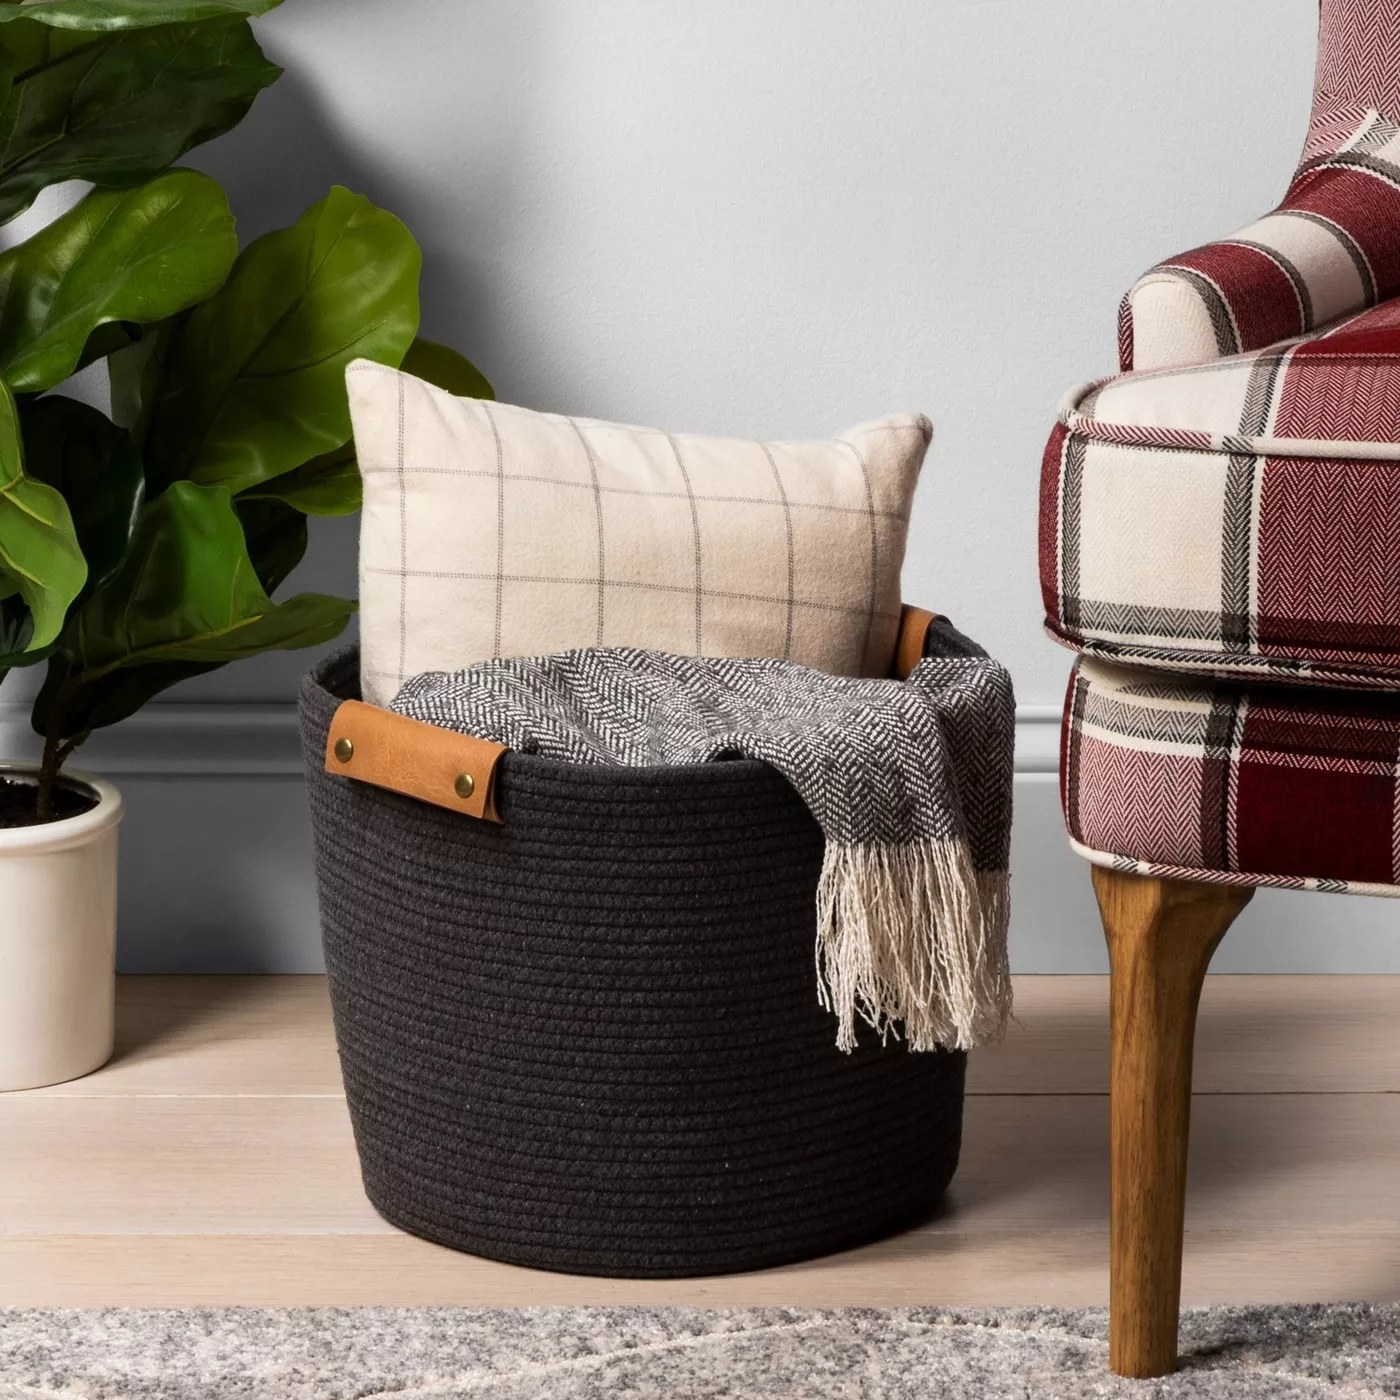 The black coiled basket is holding a pillow and a blanket and is placed next to a chair, rug and large plant